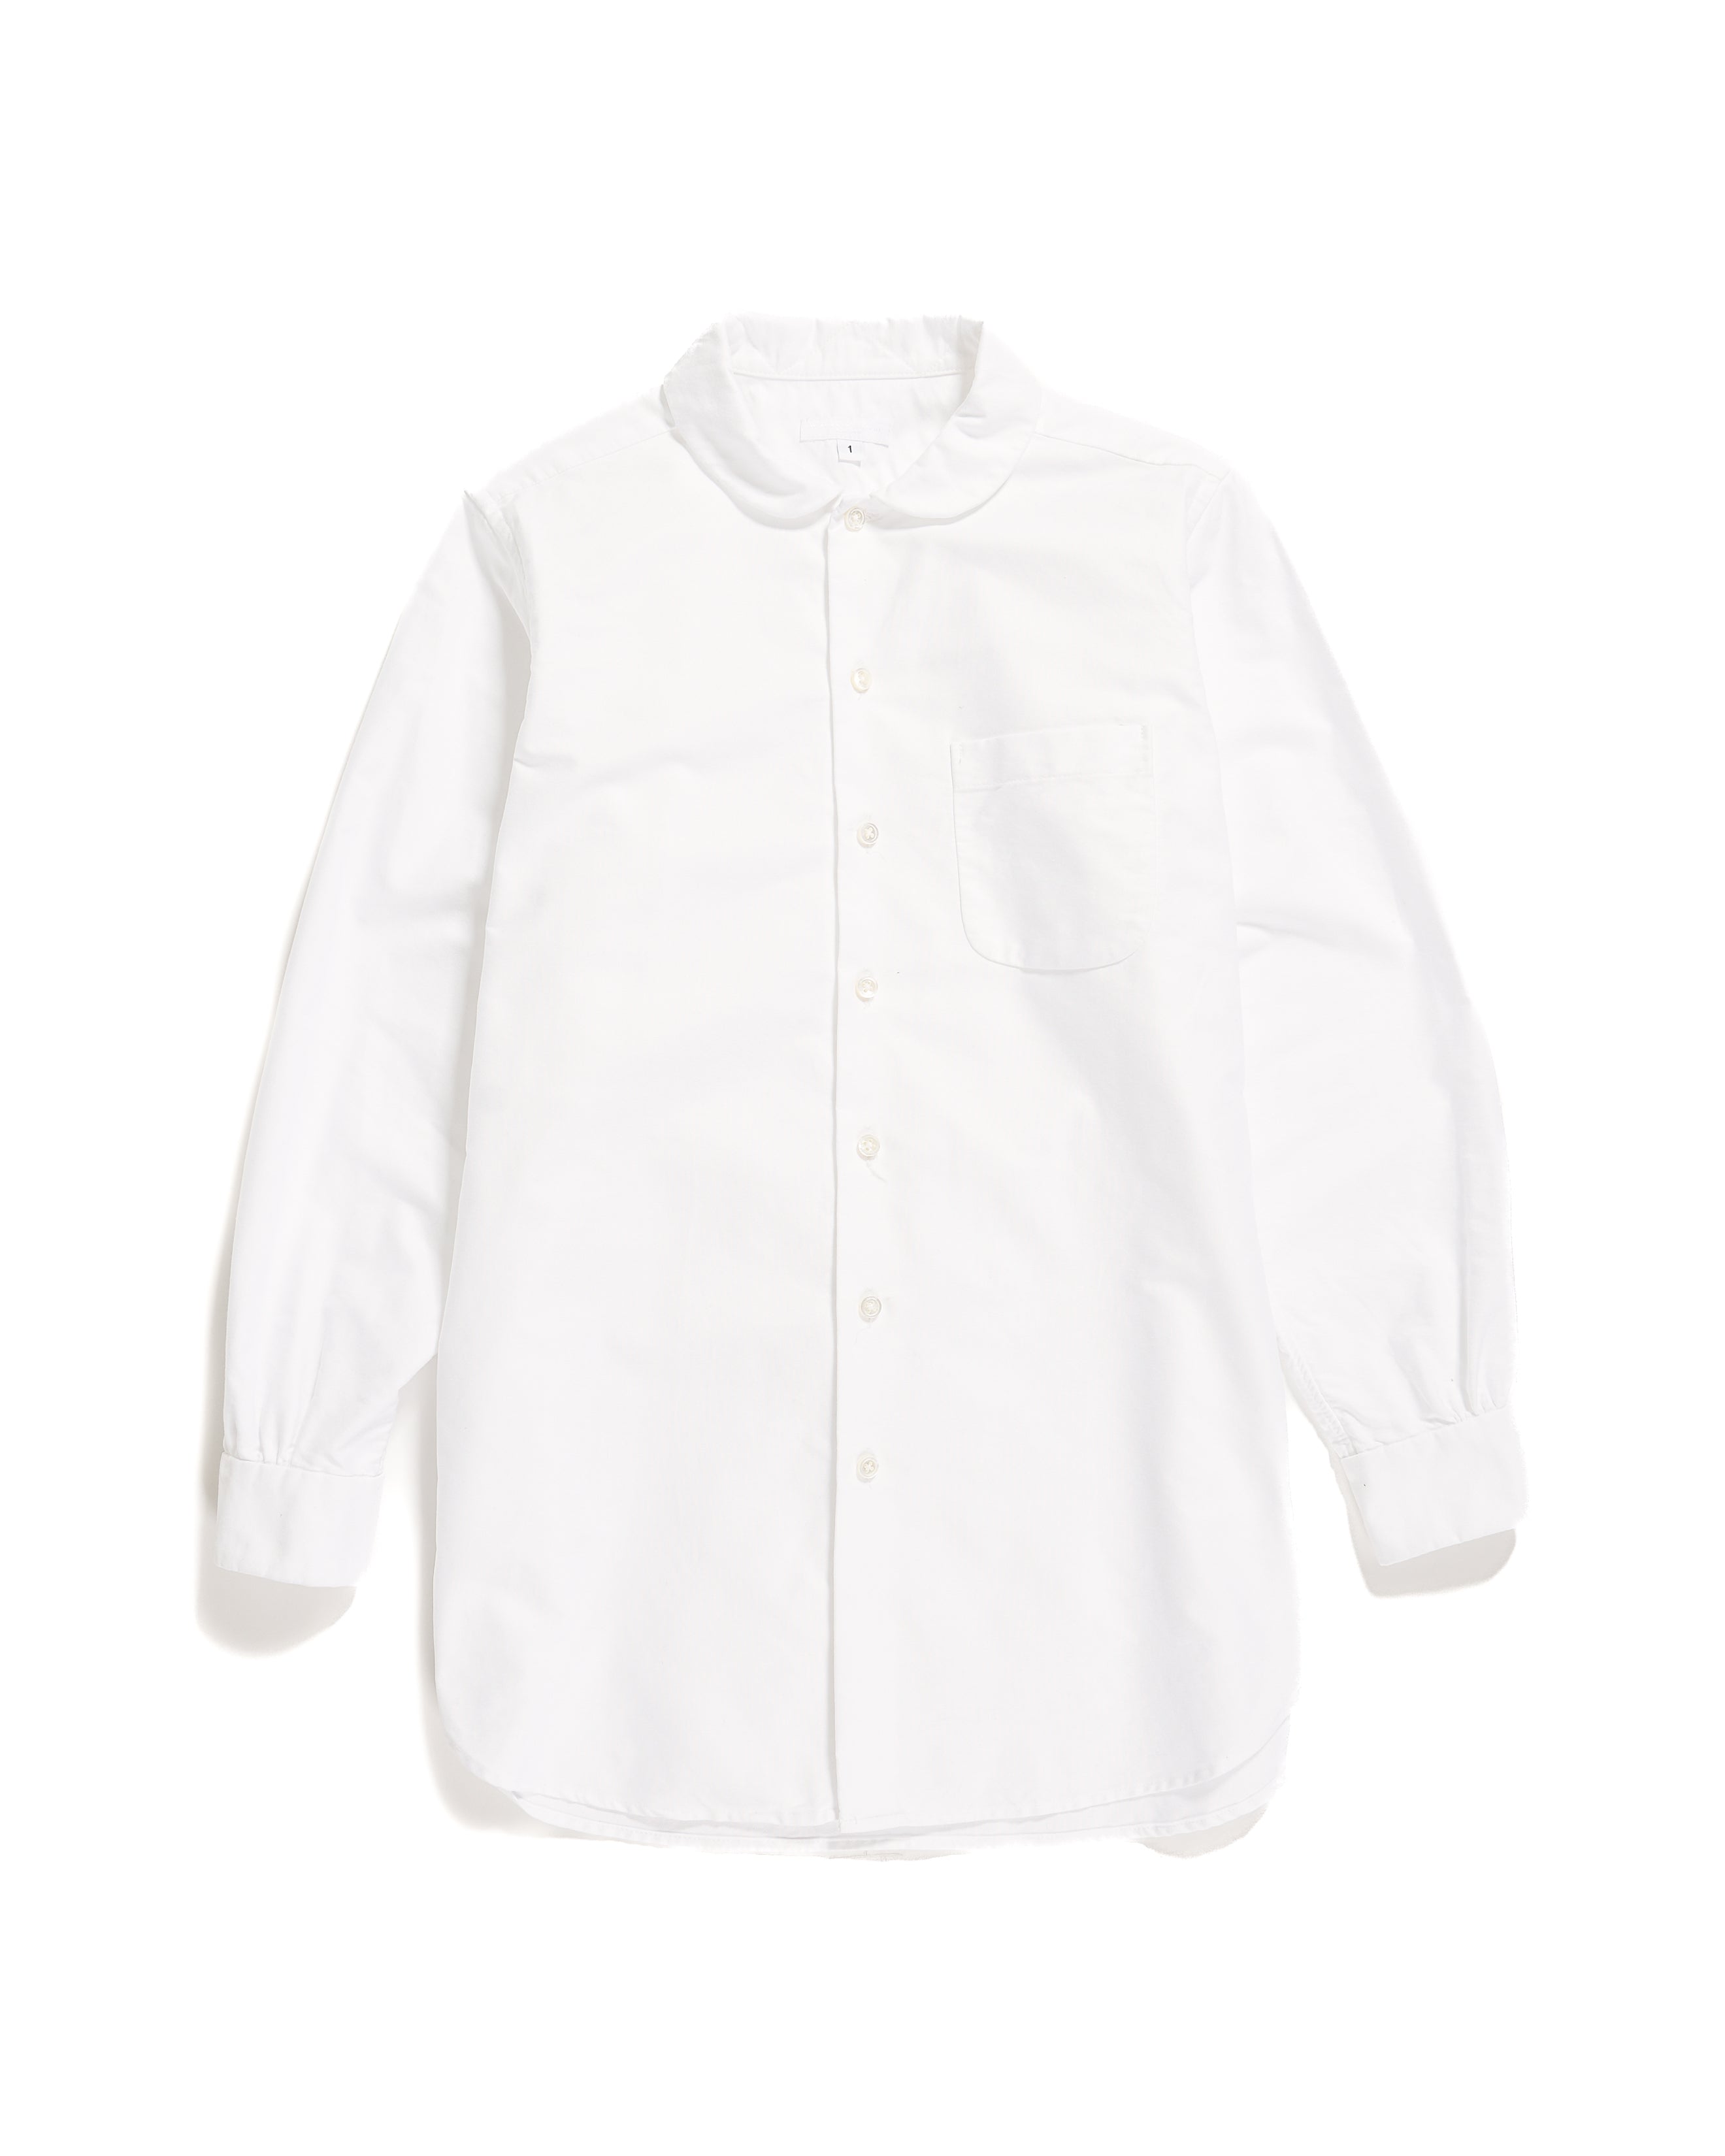 Engineered Garments Rounded Collar Shirt - White Cotton Oxford